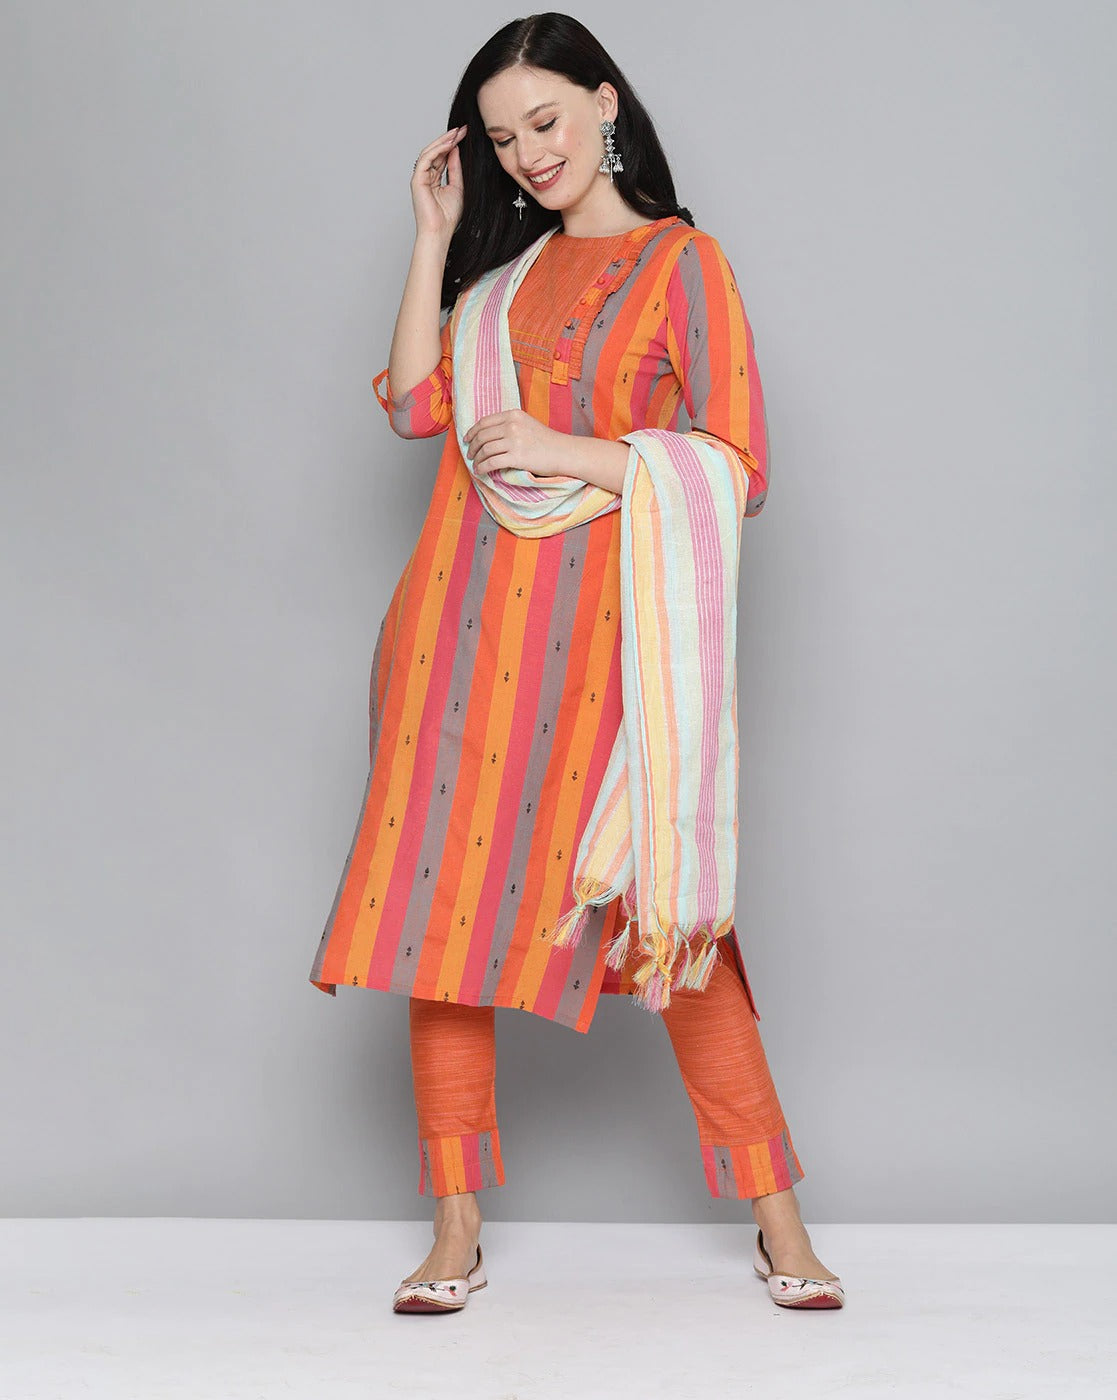 Handloom Mangalgiri Cotton Dress Material at Rs.1200/Piece in pune offer by  Shivani Handlooms